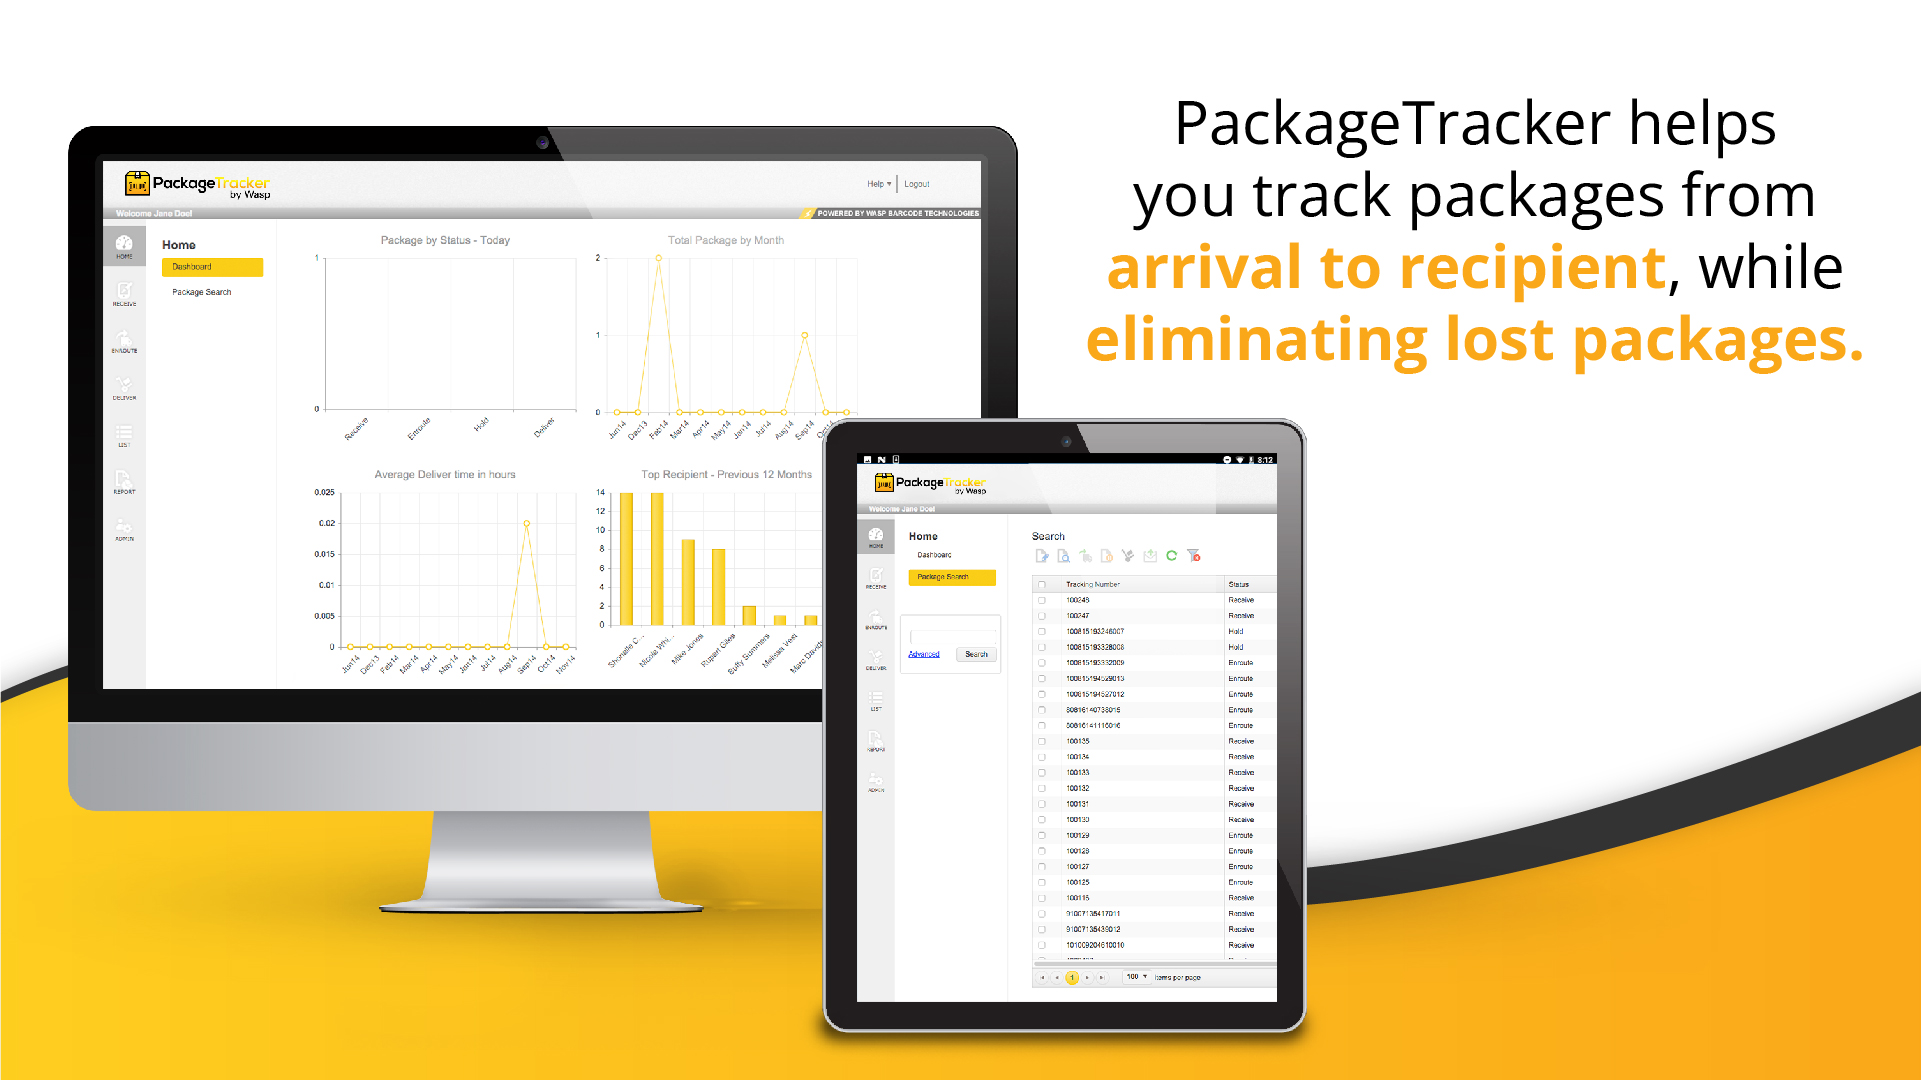 PackageTracker helps you track packages from arrival to recipient, while eliminating lost packages